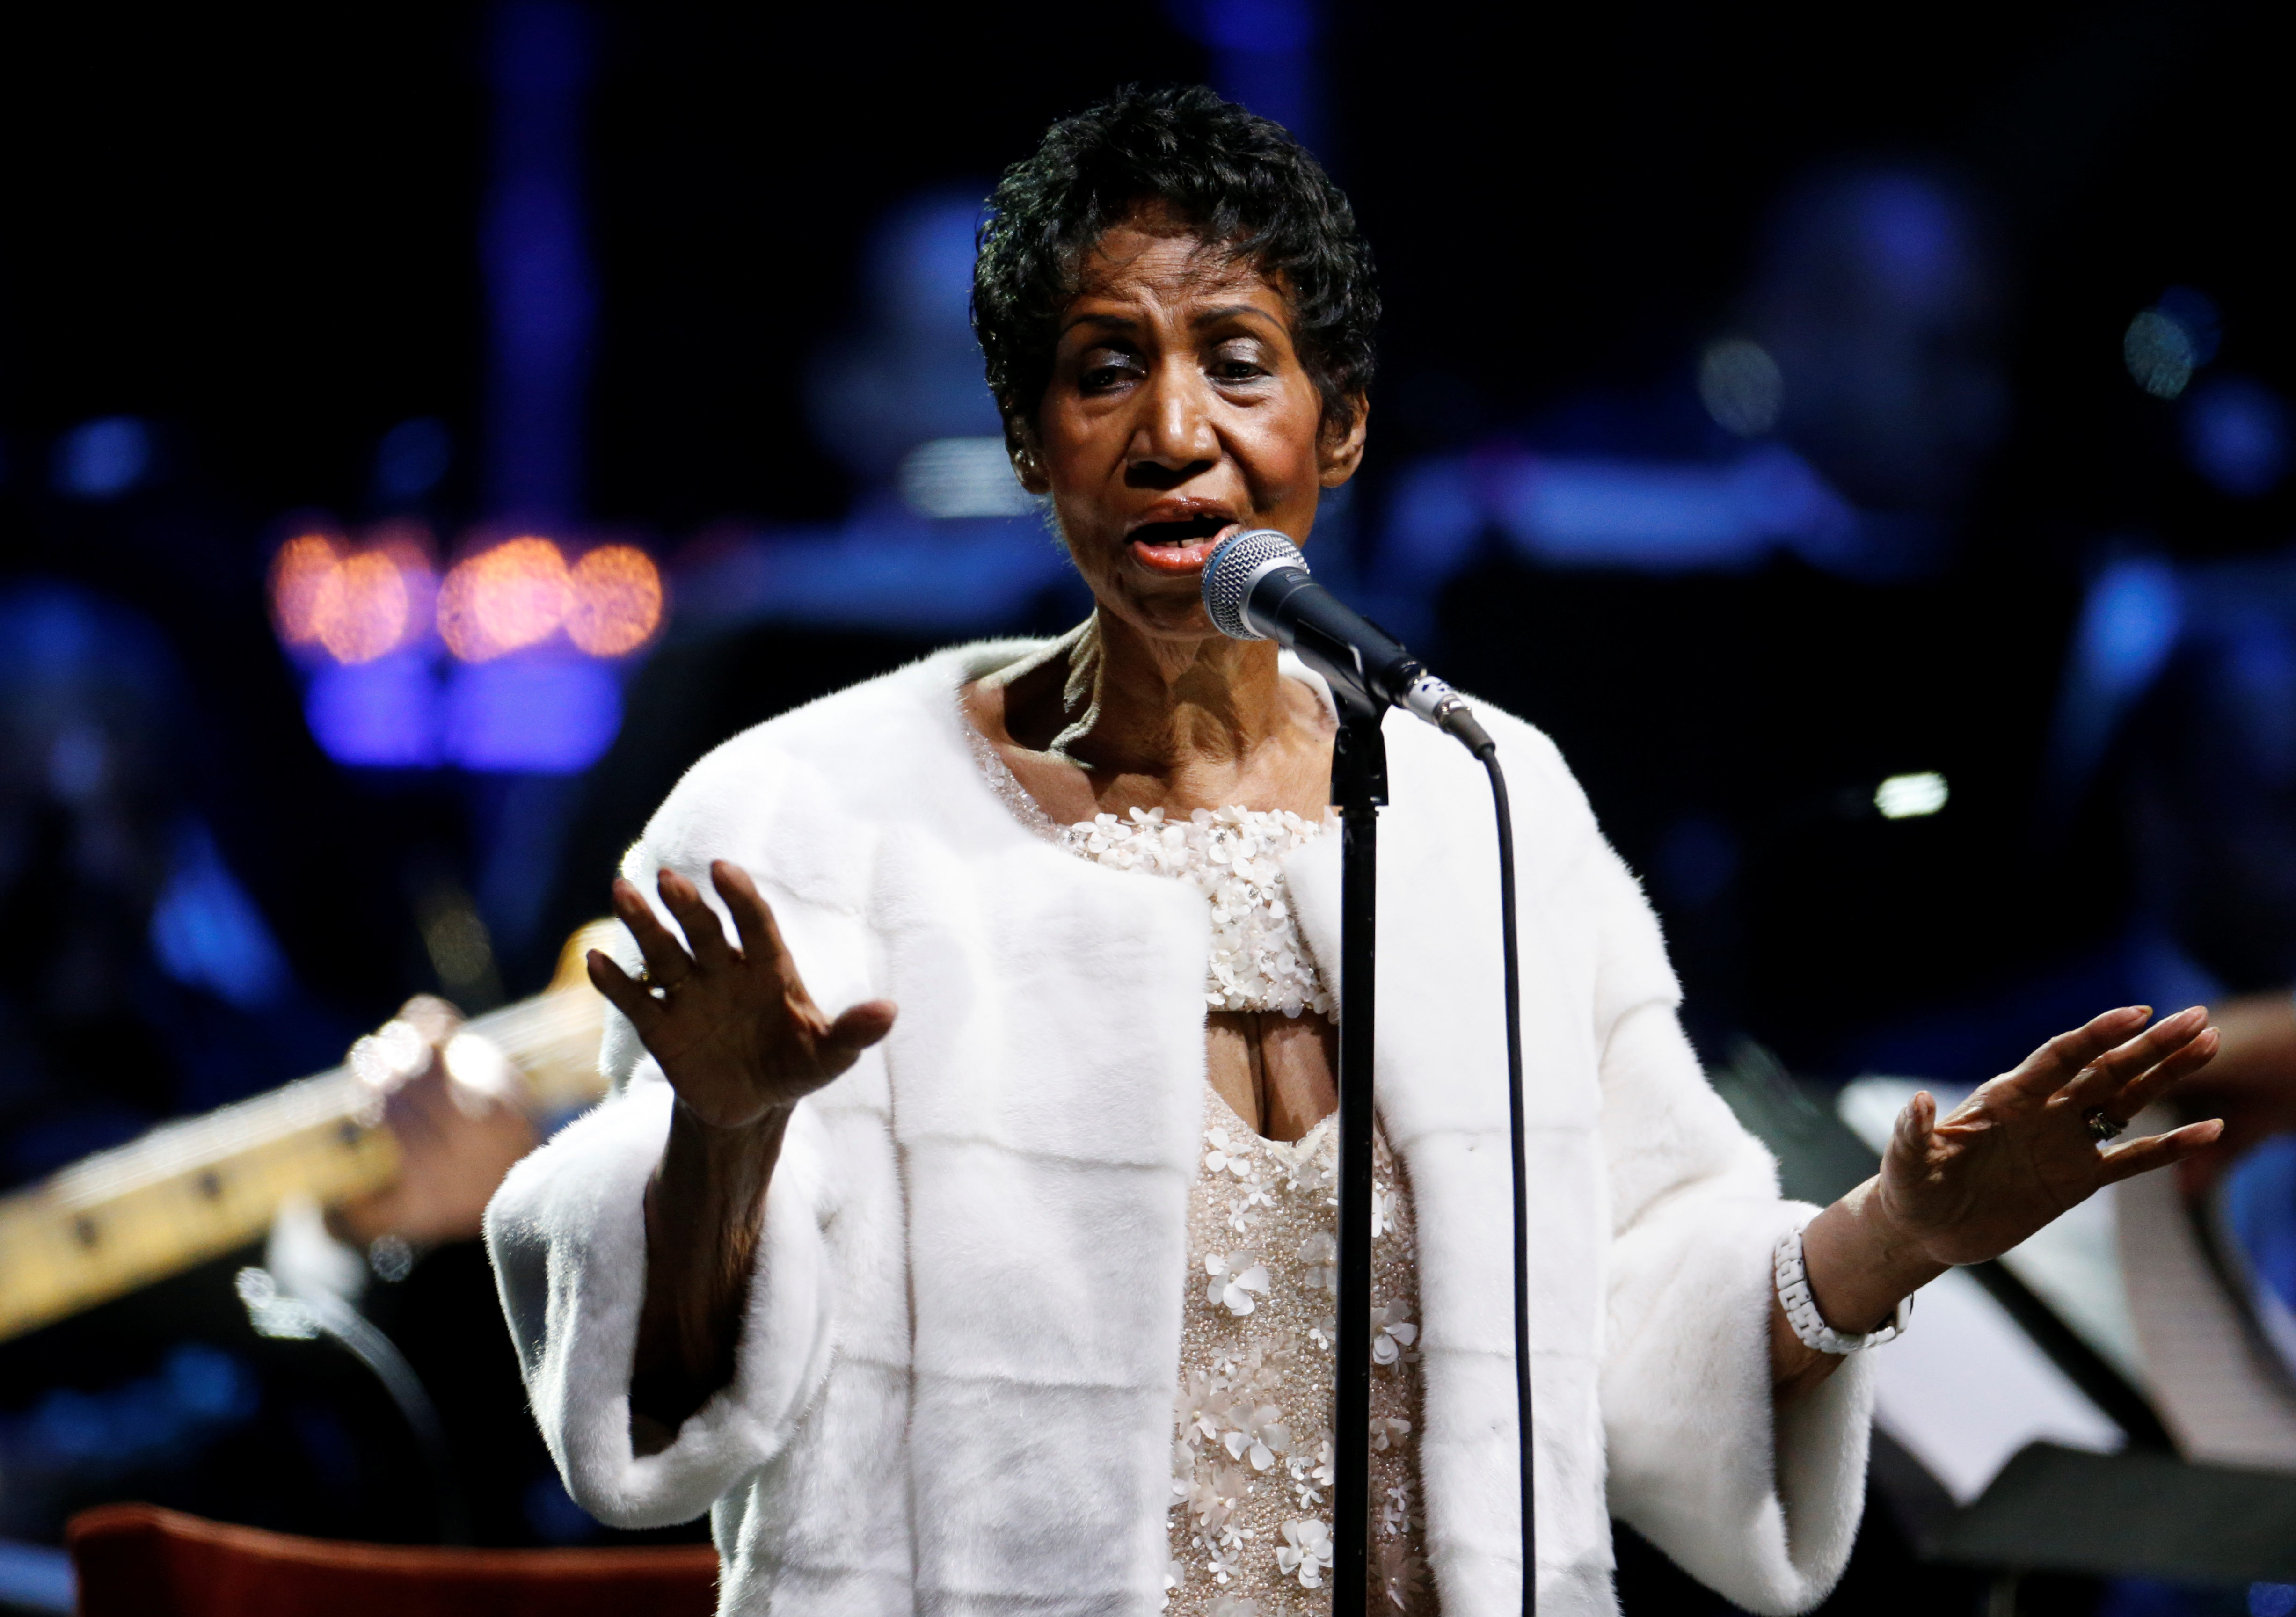 Aretha Franklin performs during the commemoration of the Elton John AIDS Foundation 25th year fall gala at the Cathedral of St. John the Divine in New York City, in New York, U.S. November 7, 2017. REUTERS/Shannon Stapleton - RC1B9F4ACF30